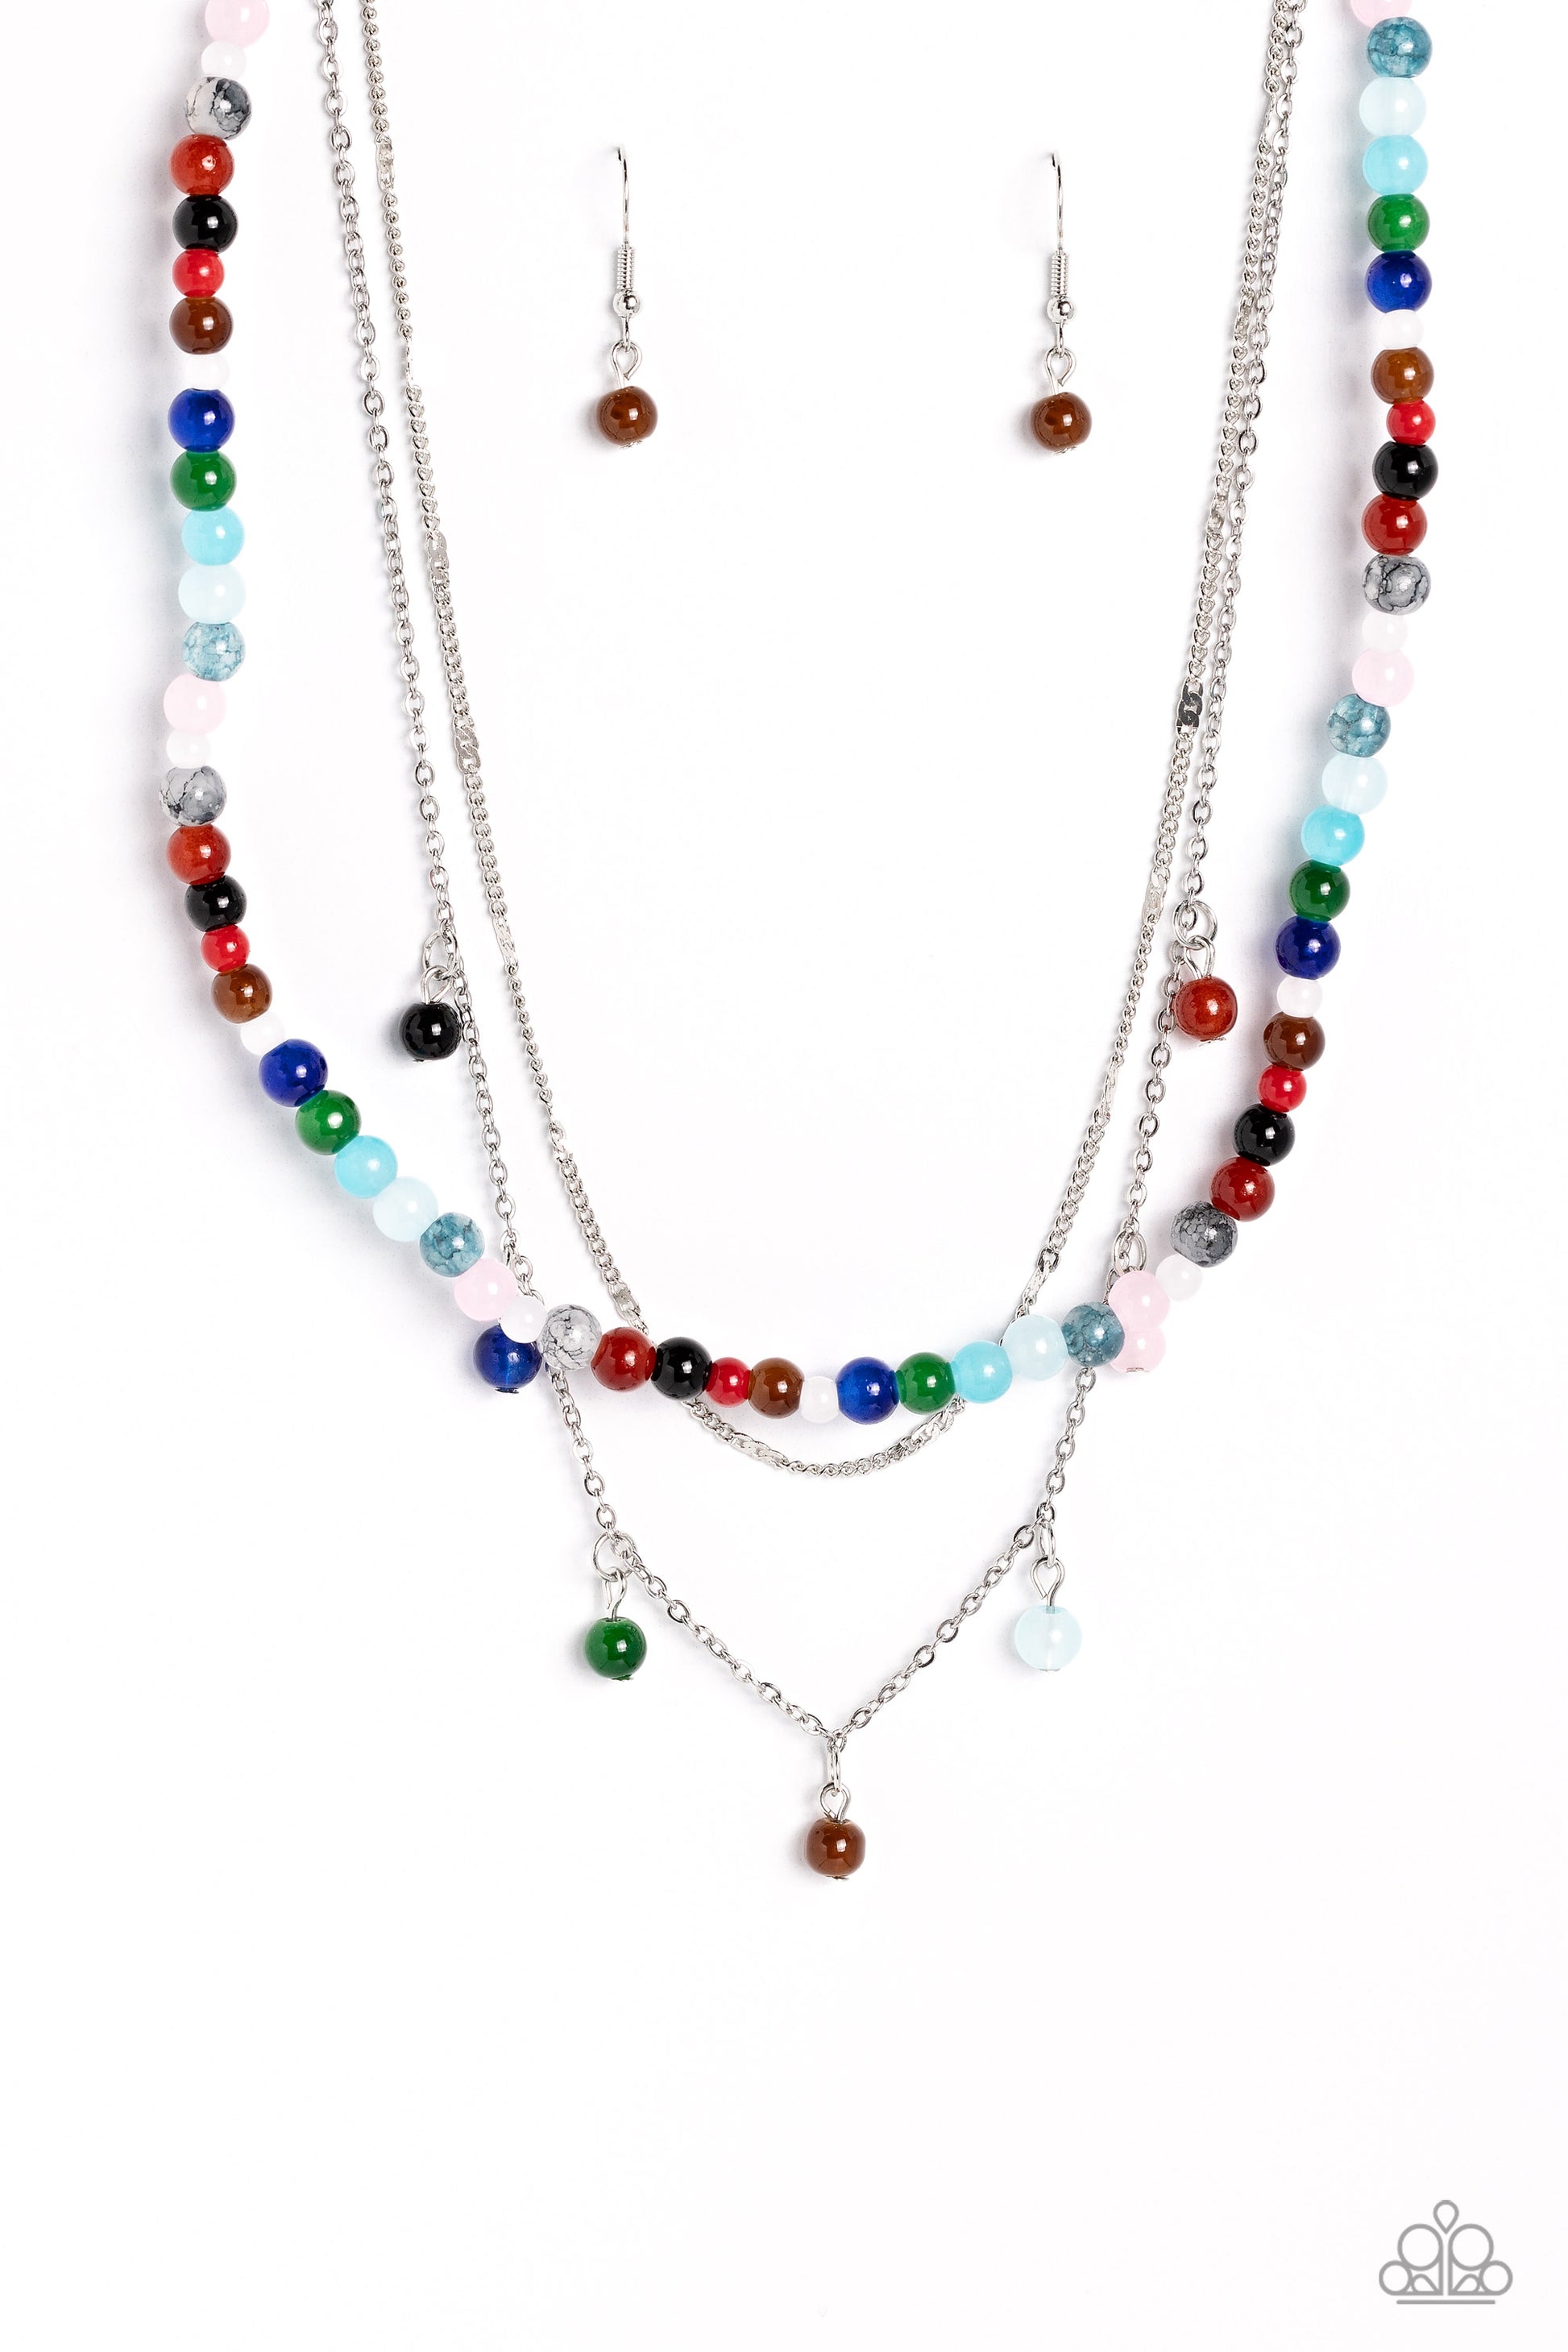 BEAD All About It - multi - Paparazzi necklace